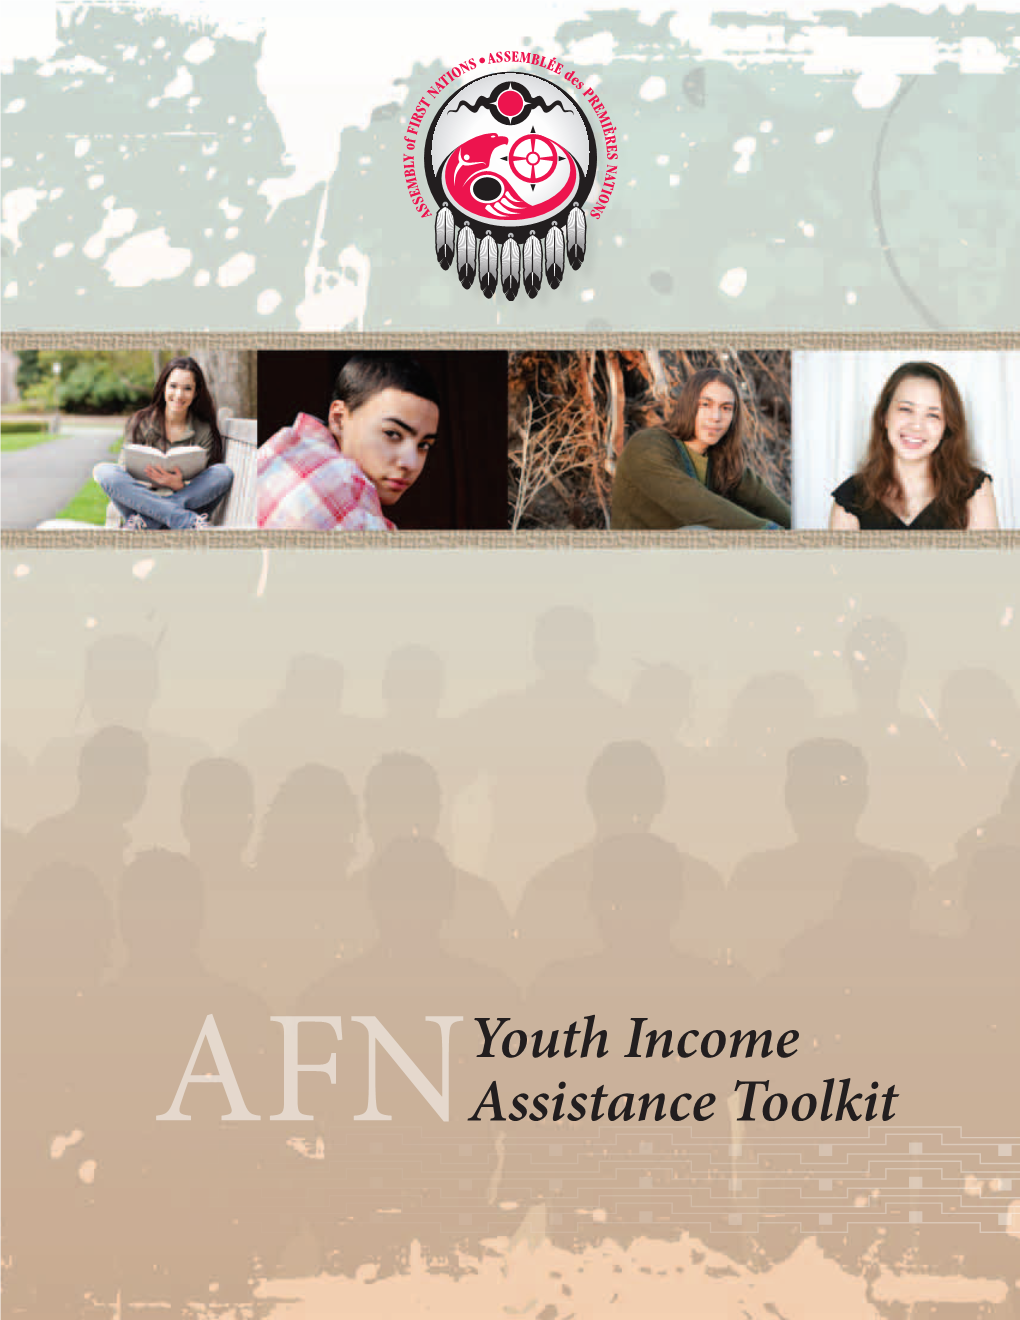 Afnyouth Income Assistance Toolkit